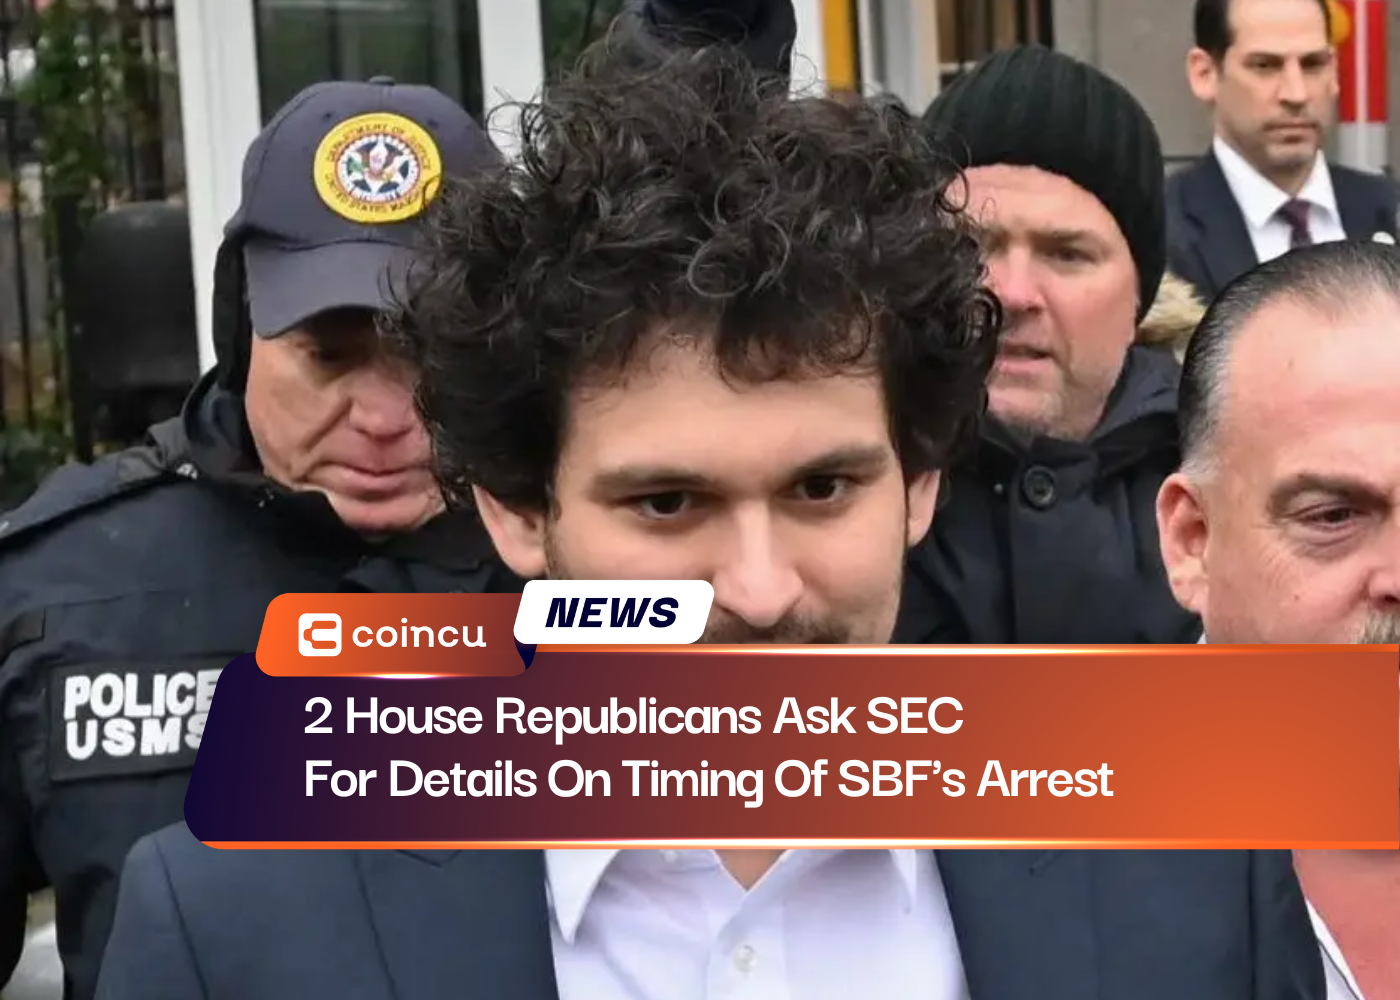 2 House Republicans Ask SEC For Details On Timing Of SBF's Arrest